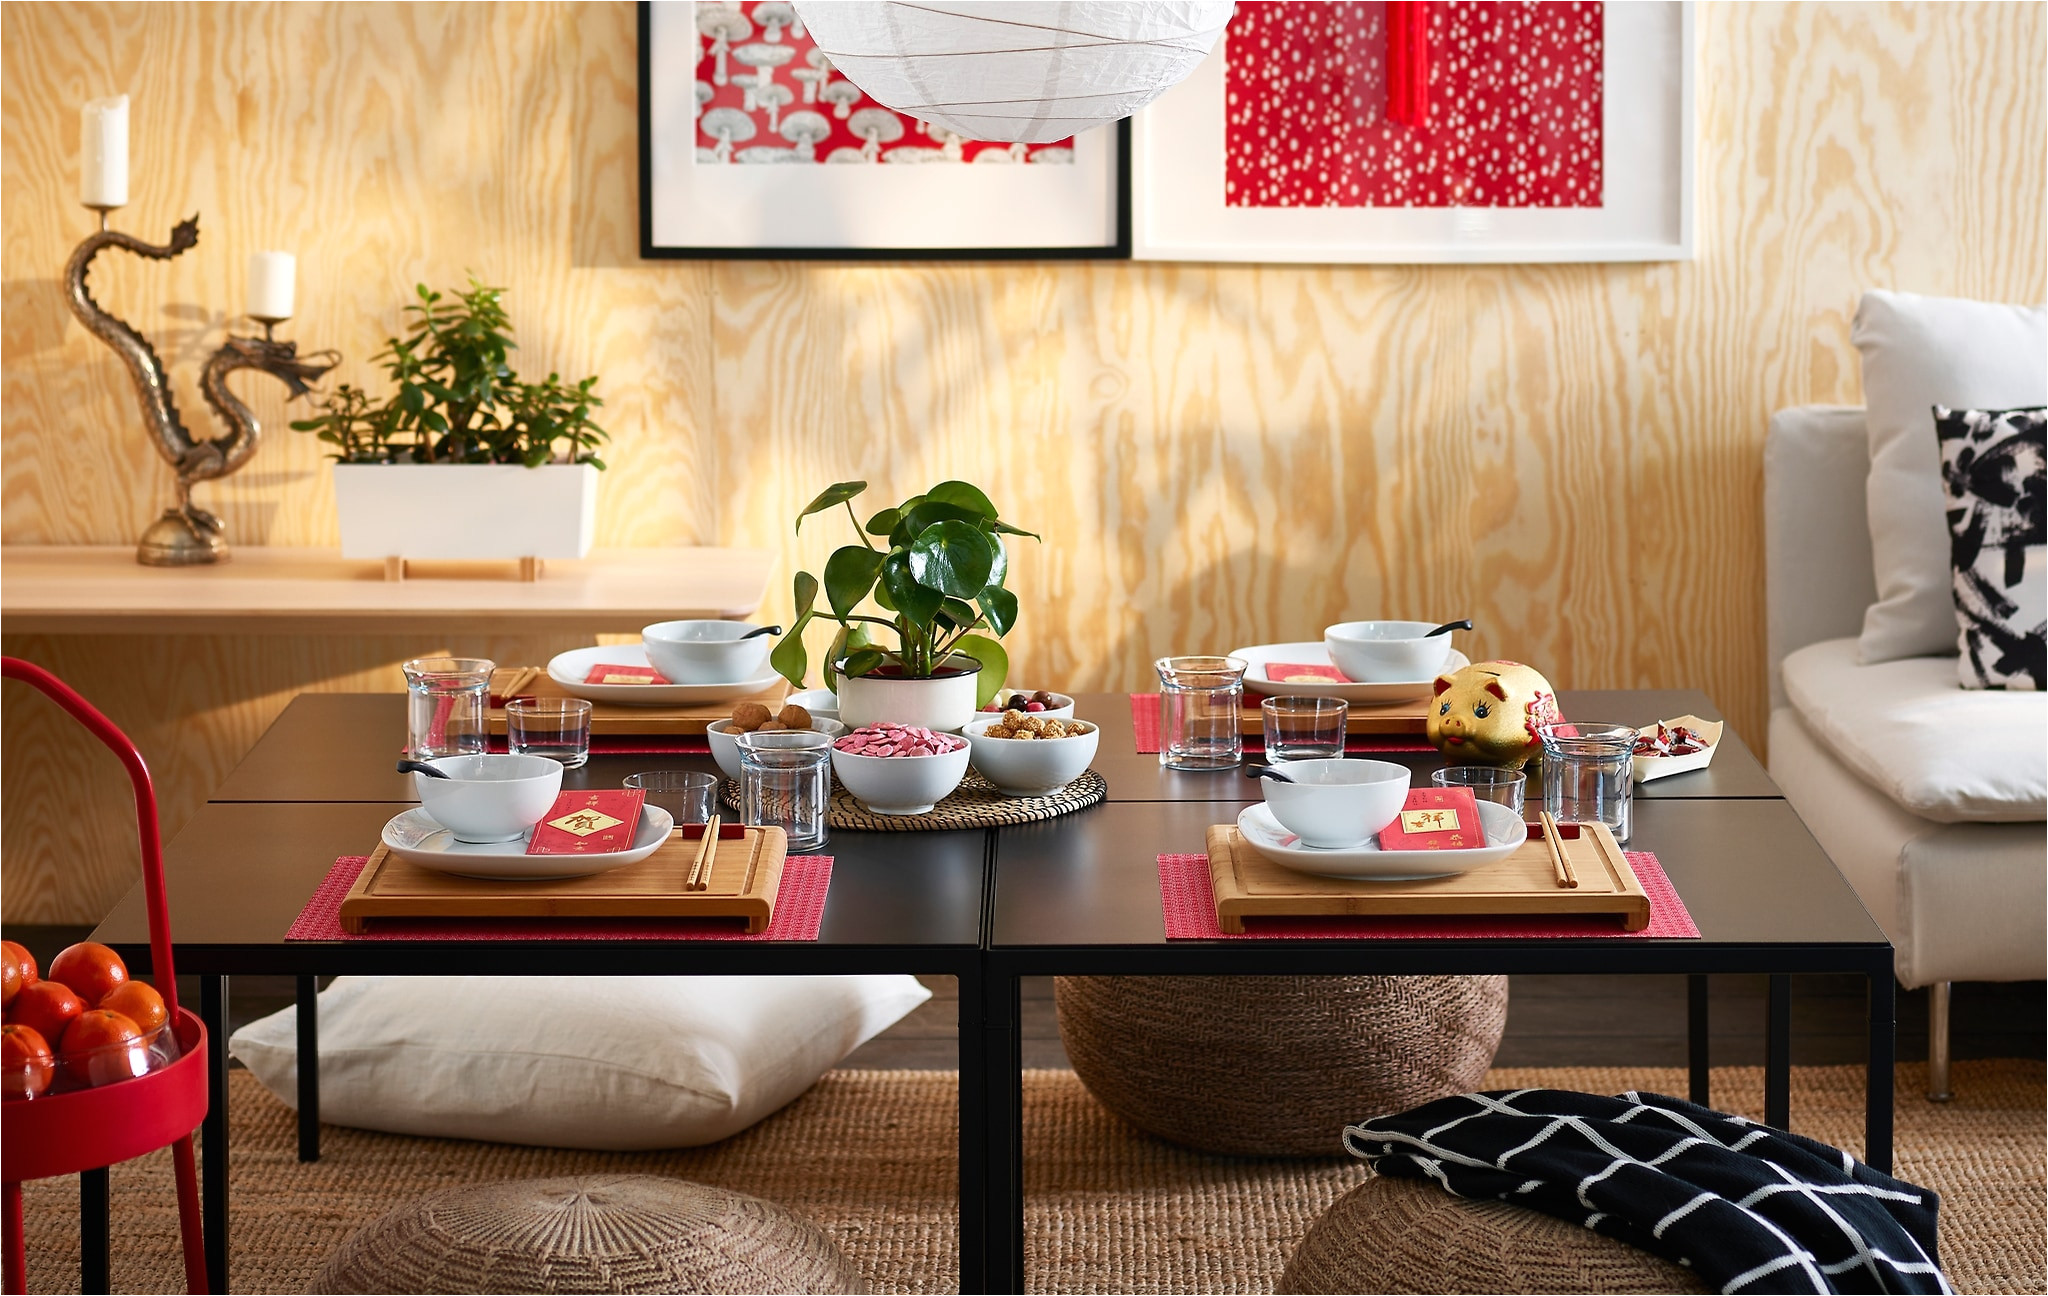 setting the table with some rimforsa chopping boards in bamboo is one idea on how to